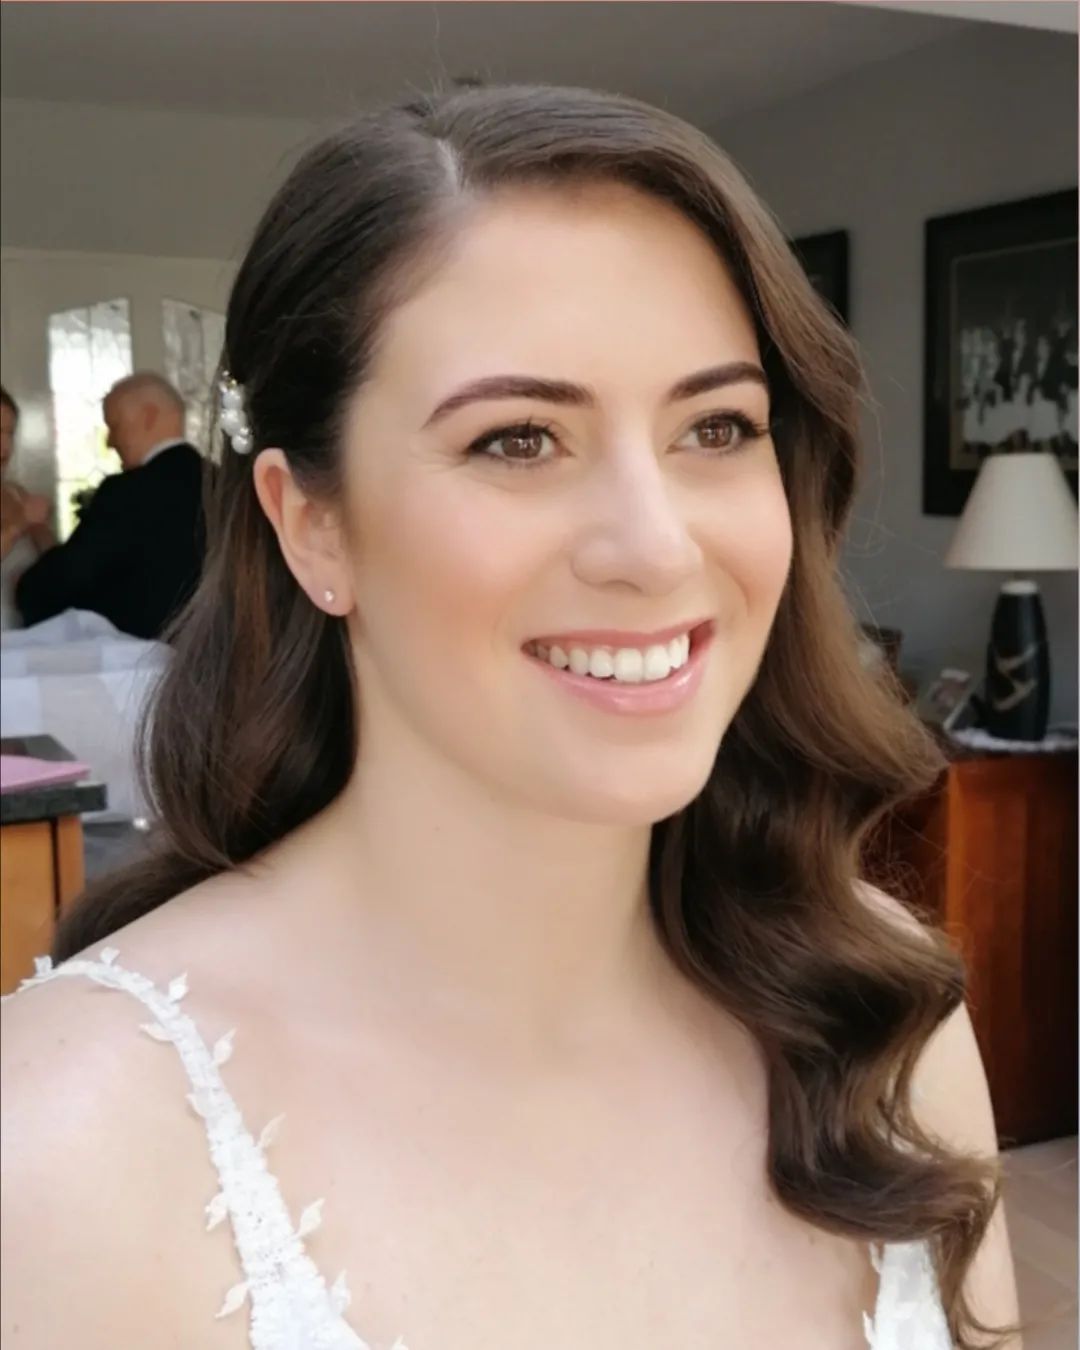 Megan 🌺 my first April bride looking beautiful for her Dublin City wedding and the sun shone for her! Megan was so trusting and she wanted a classic, elegant bridal look. I used #luminoussilkfoundation and the amazing #kevinaucoinskinenhancer to perfect her skin with the #tomfordshadeandilluminate intensity one.
Hair by the wonderful @siansharkeyhairstylist
.
.
.
.
#bridalmakeupartist #irishmakeupartist #irishbrides